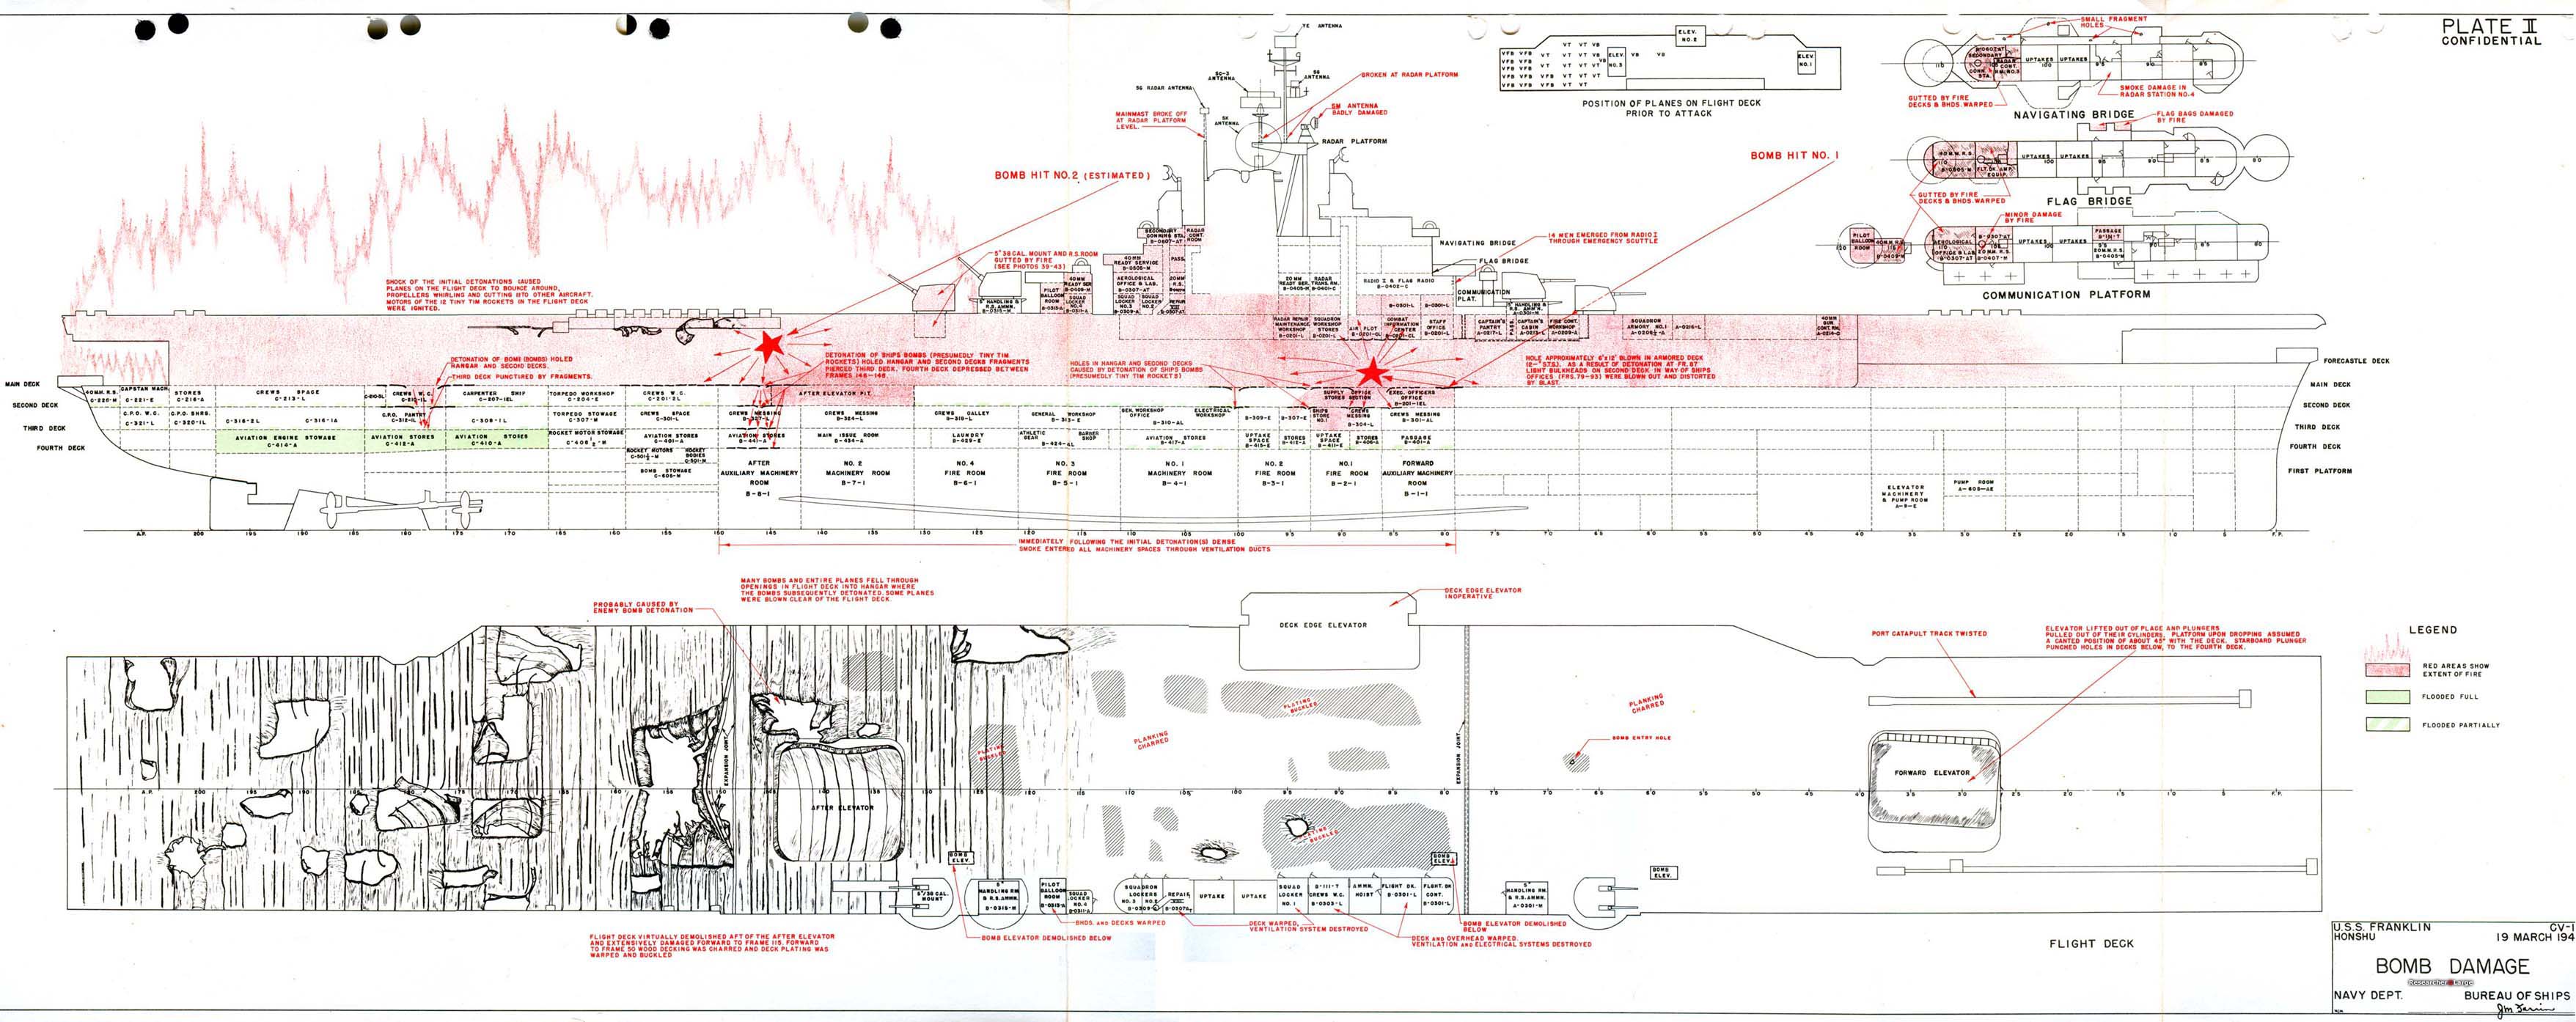 A 1946 US Navy diagram of the damage sustained by USS Franklin during a bombing attack 19 Mar 1945. Photo 1 of 2.